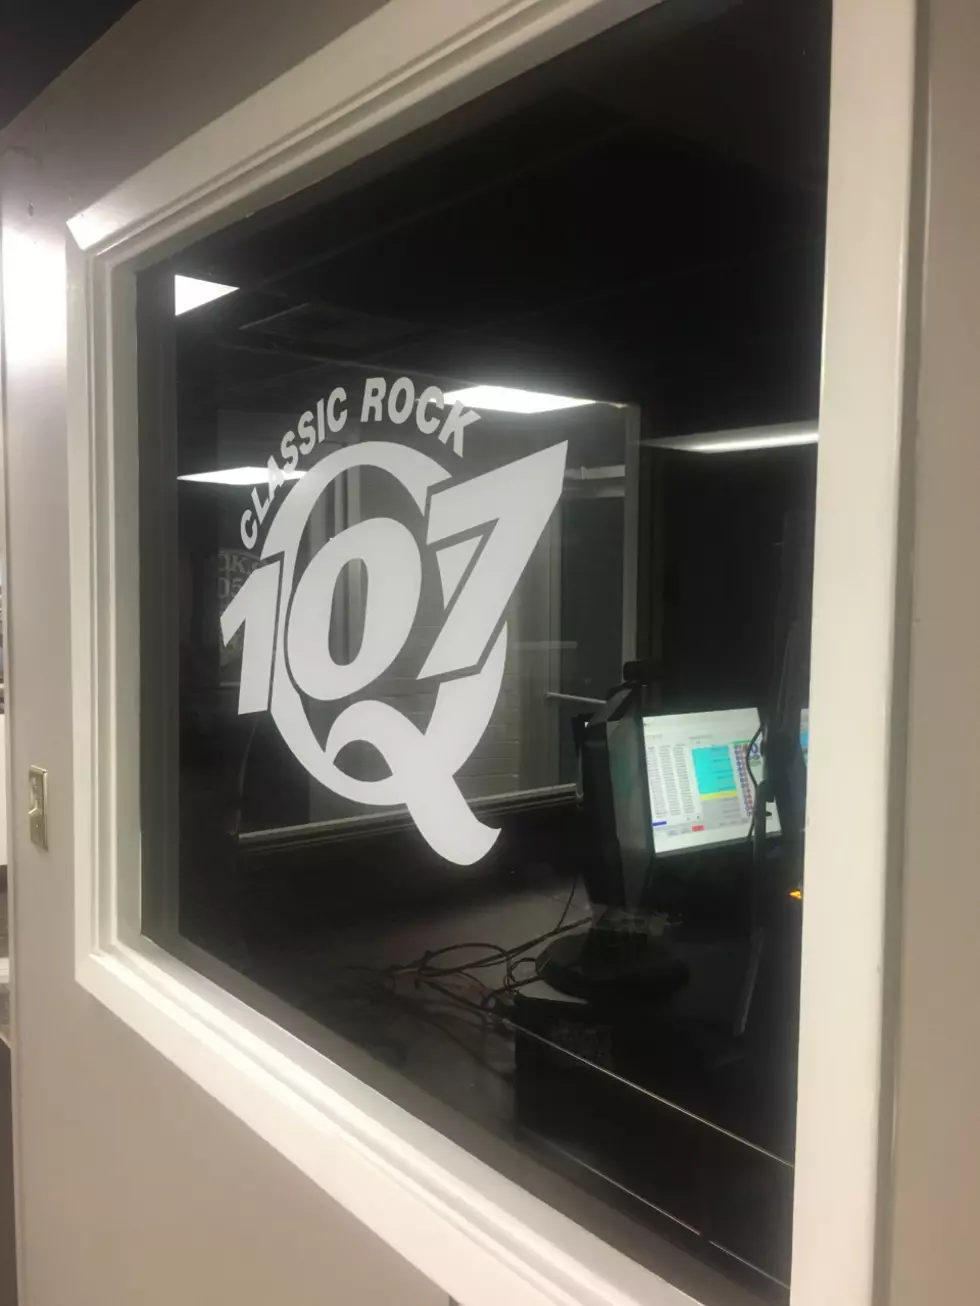 Thanks For Listening – Mark Wraps Up His Final Day At Q107